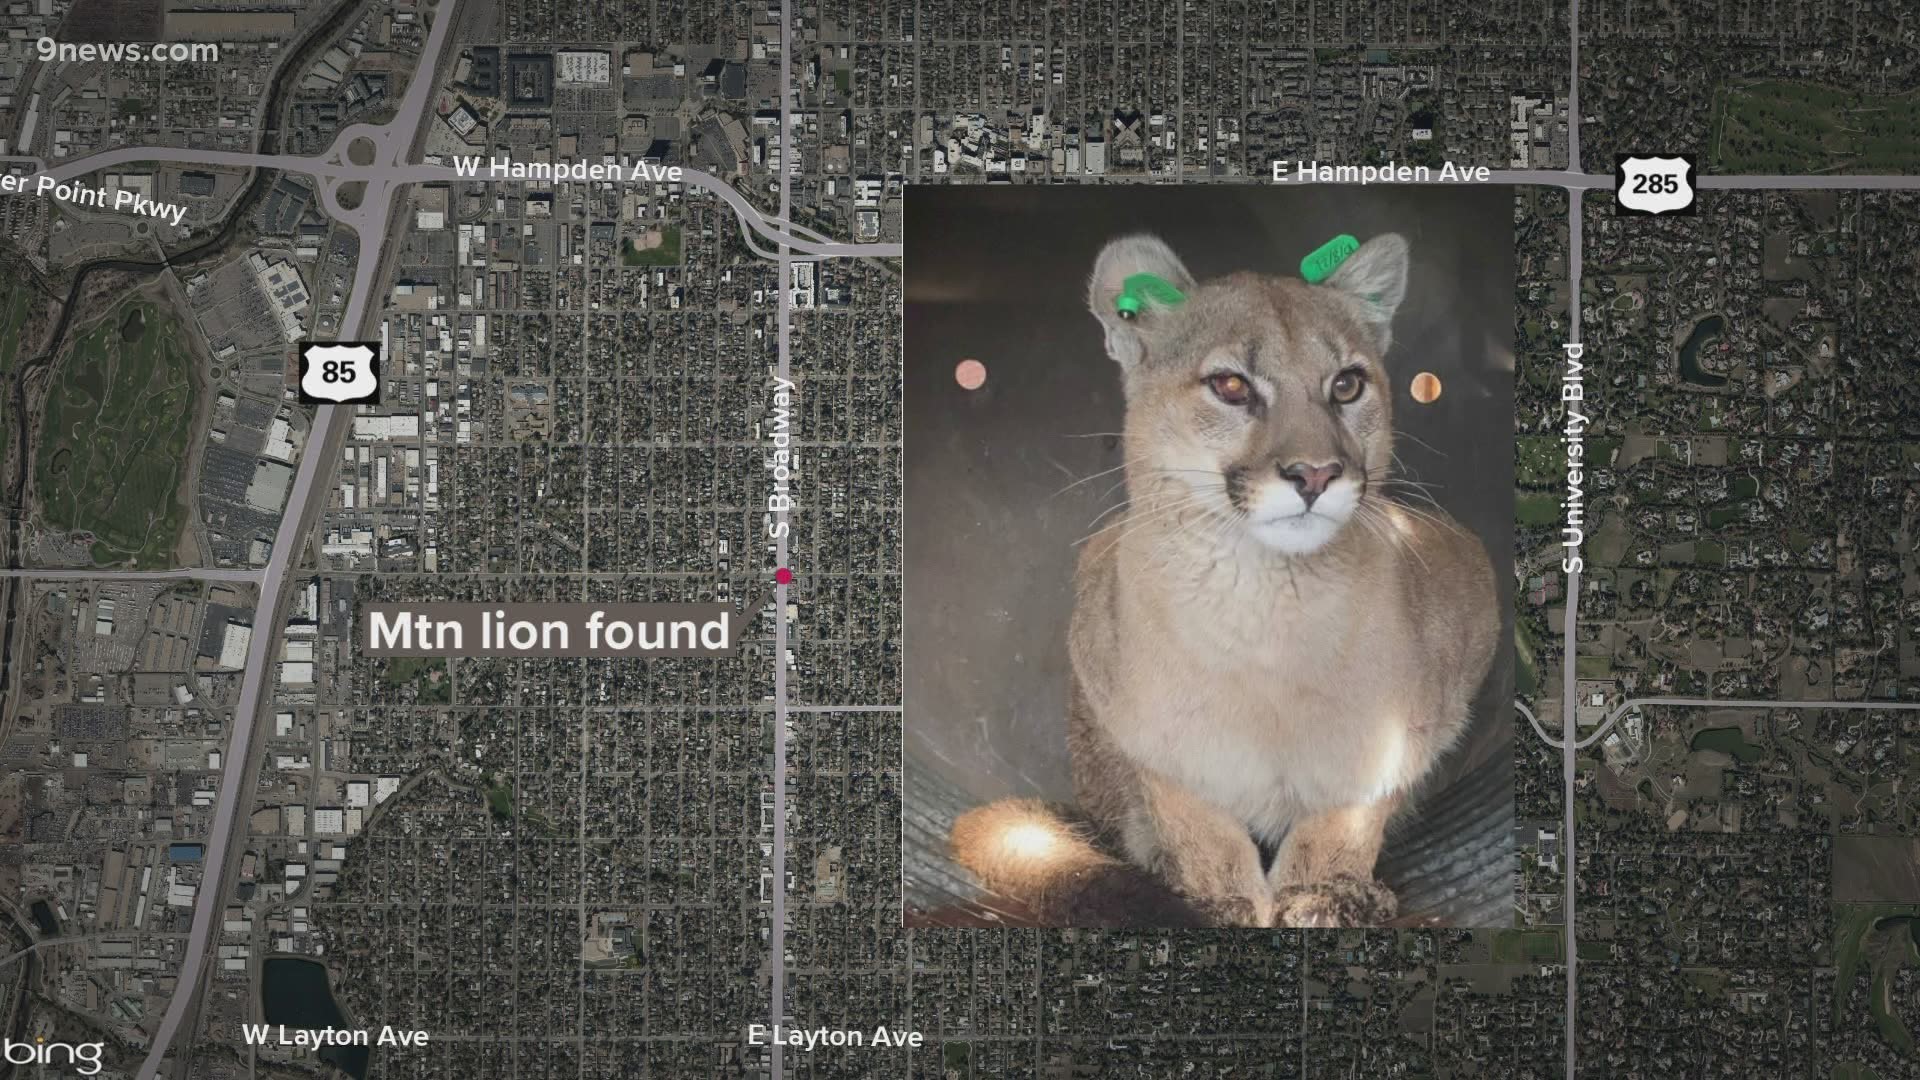 Wildlife officers said they tranquilized the big cat and relocated it outside the city.